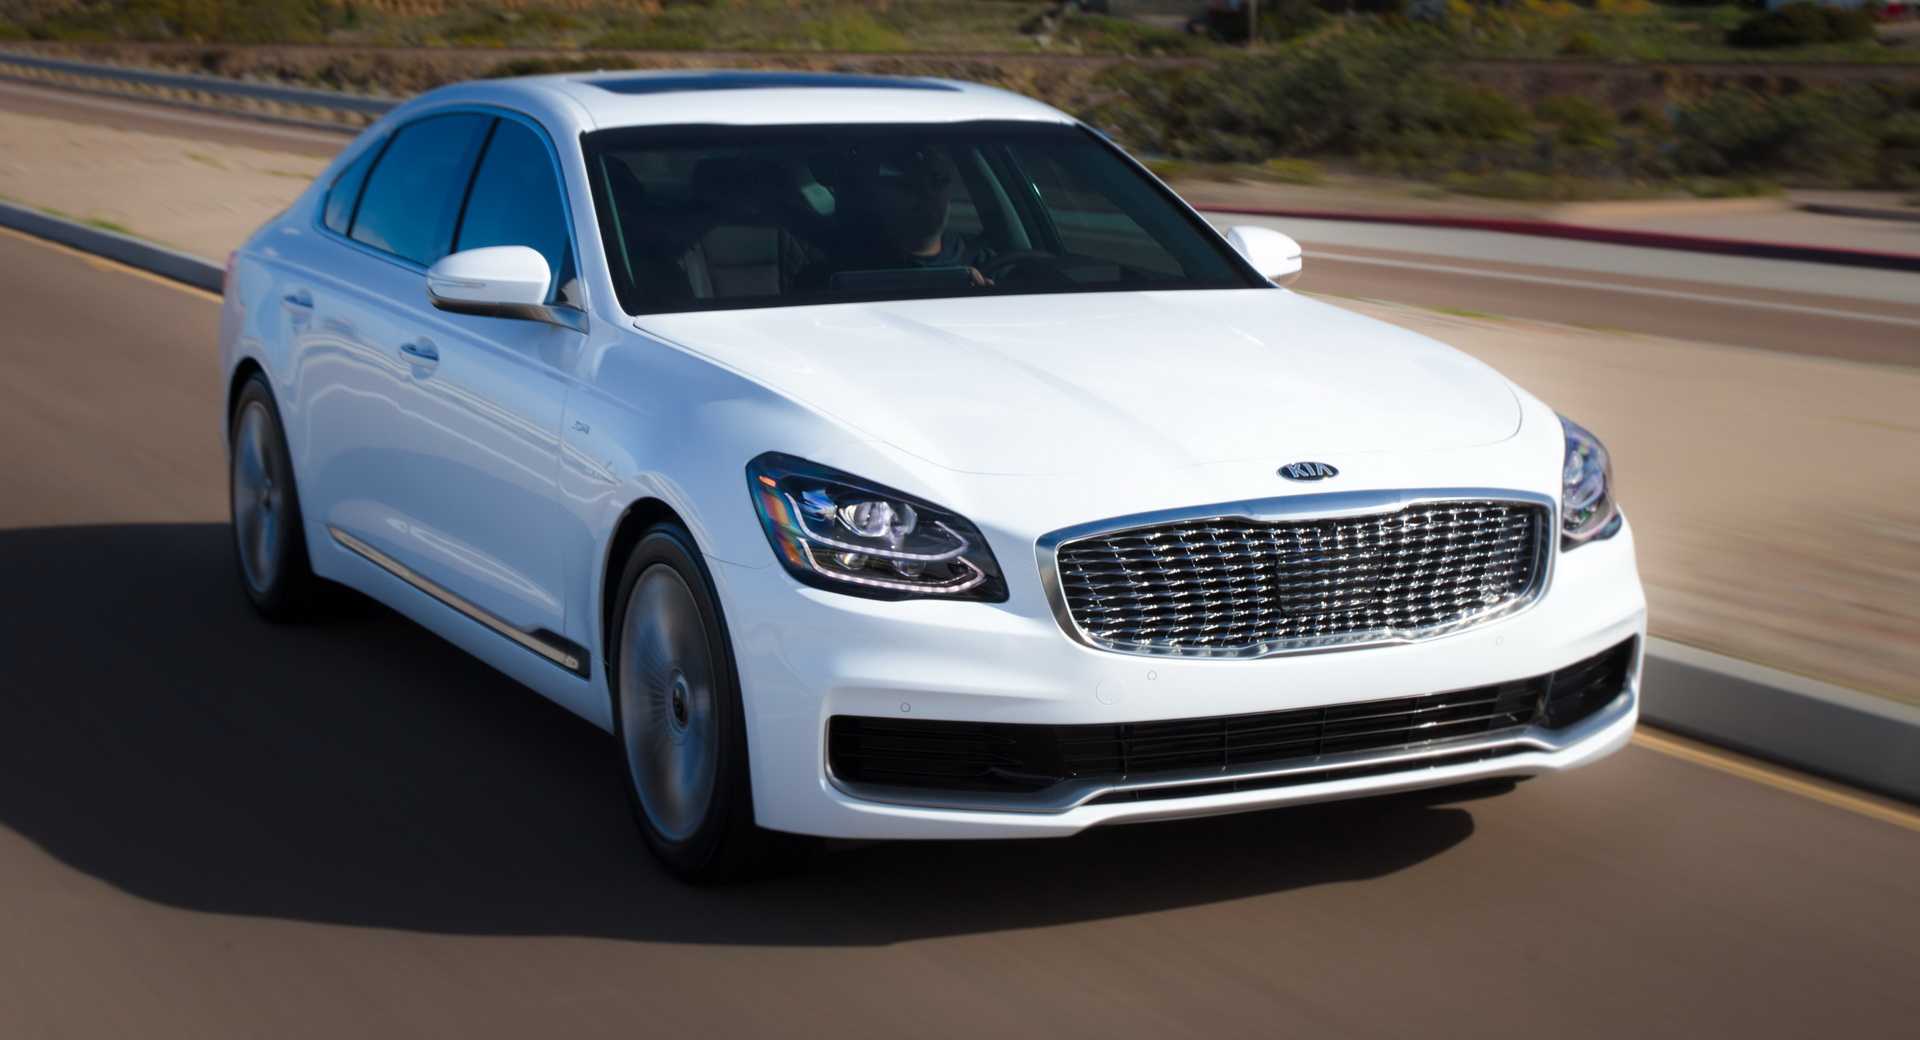 USSpec 2019 Kia K900 Is Here With A 365HP Turbo V6 And AWD  Carscoops